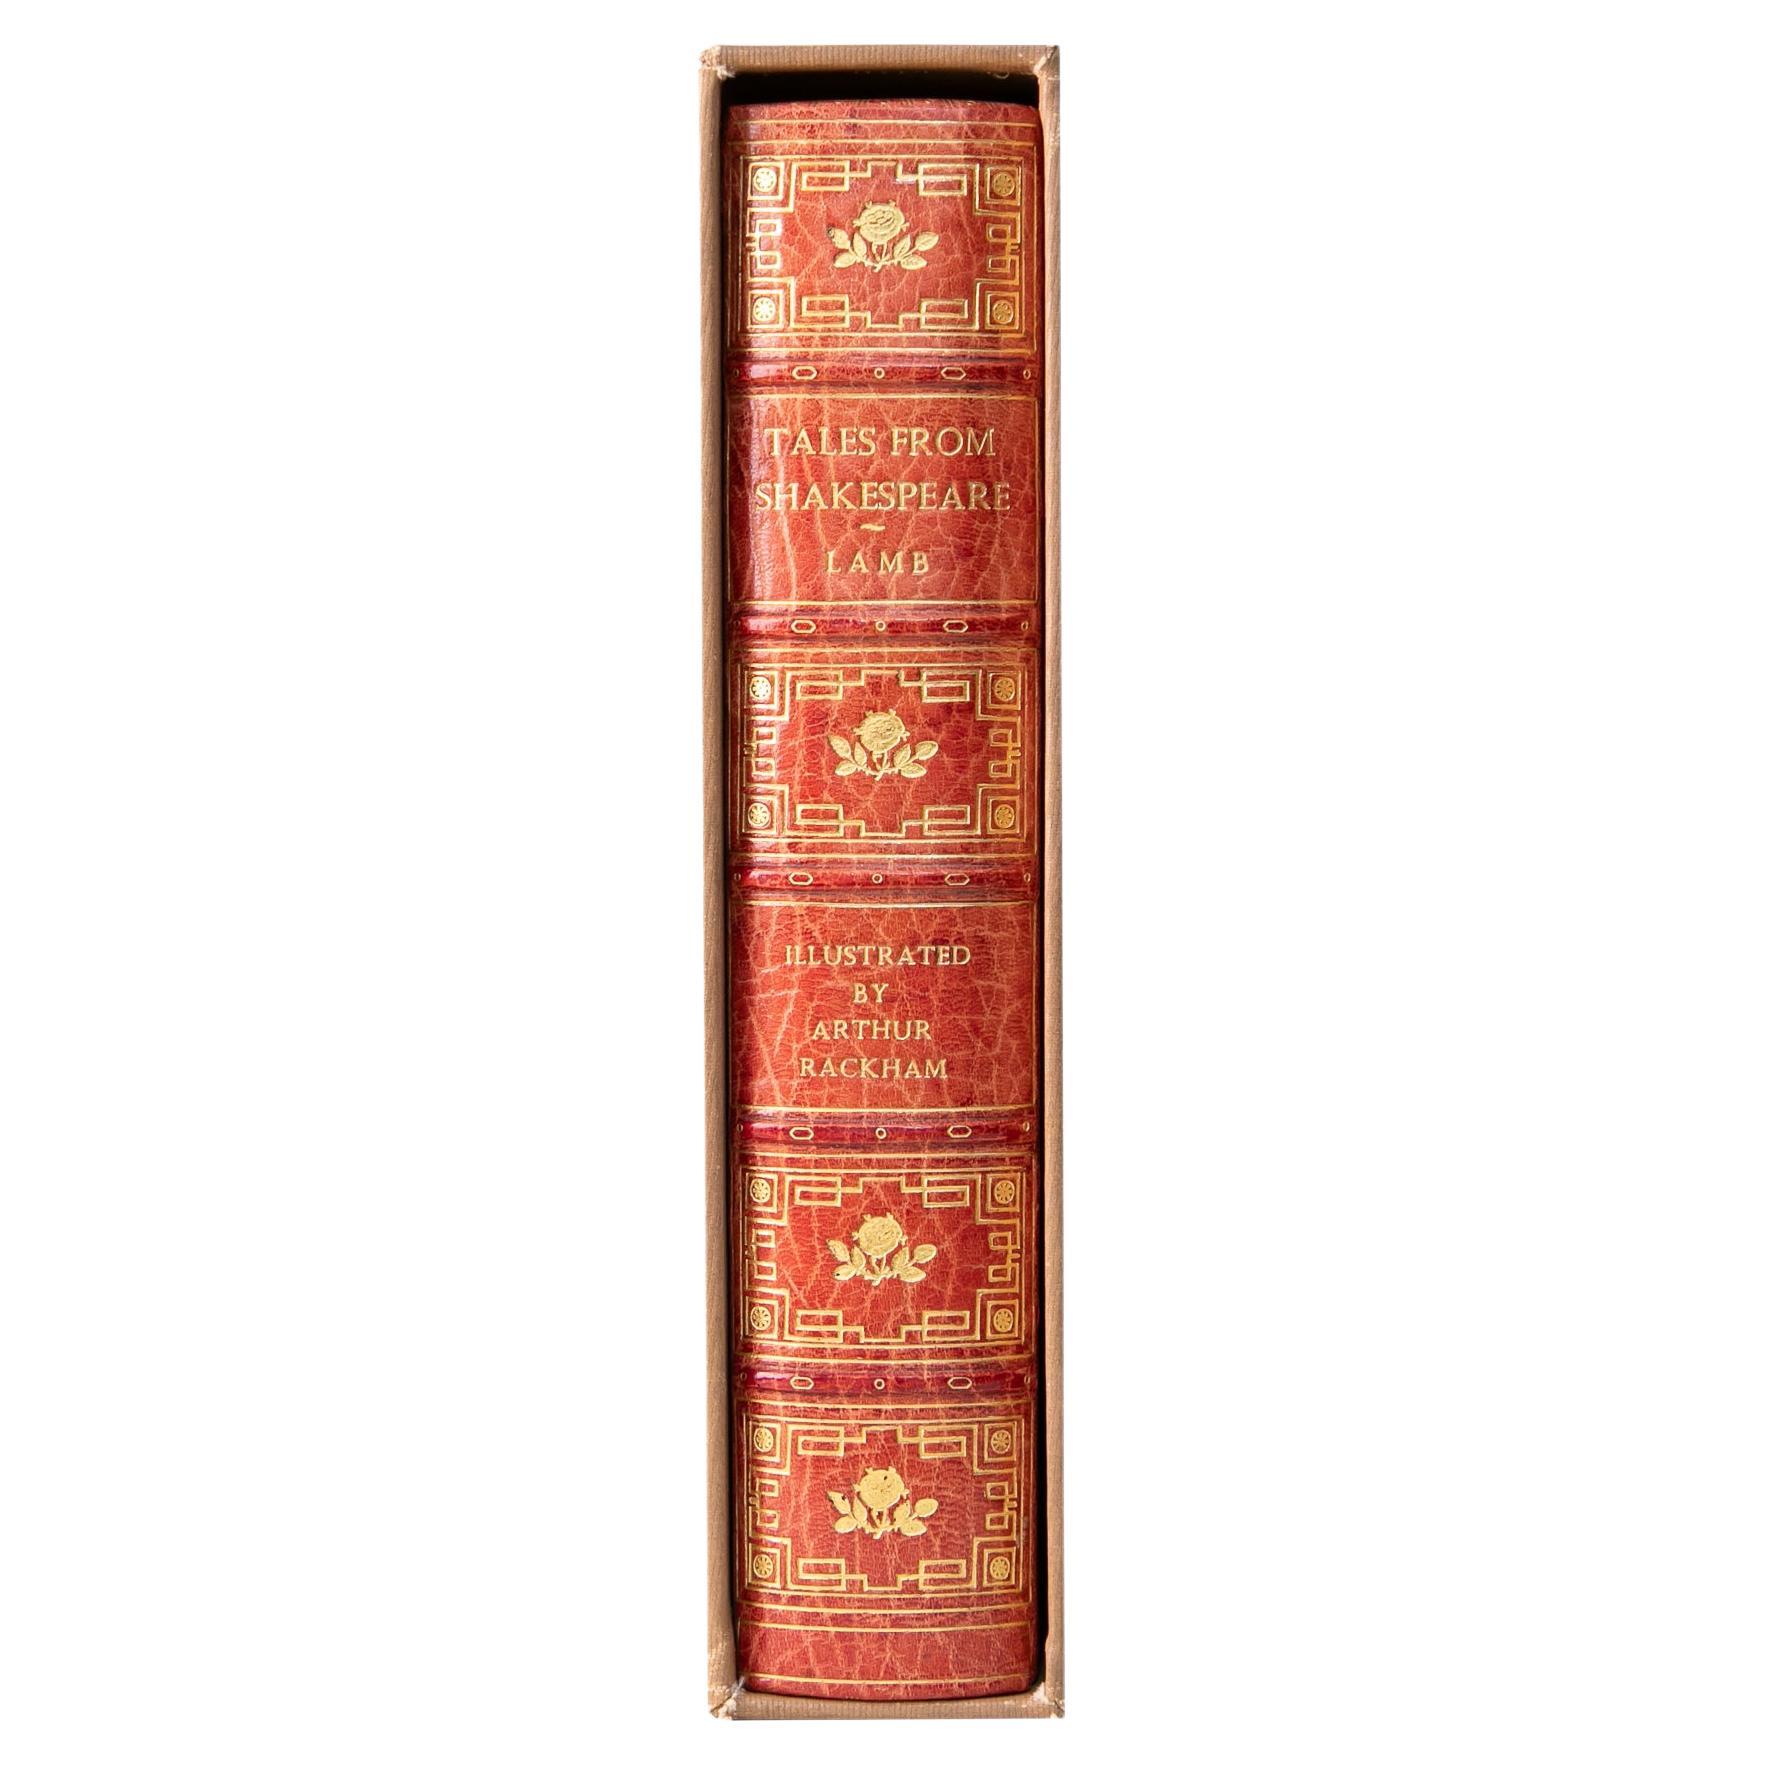 1 Volume. Charles & Mary Lamb, Tales From Shakespeare.